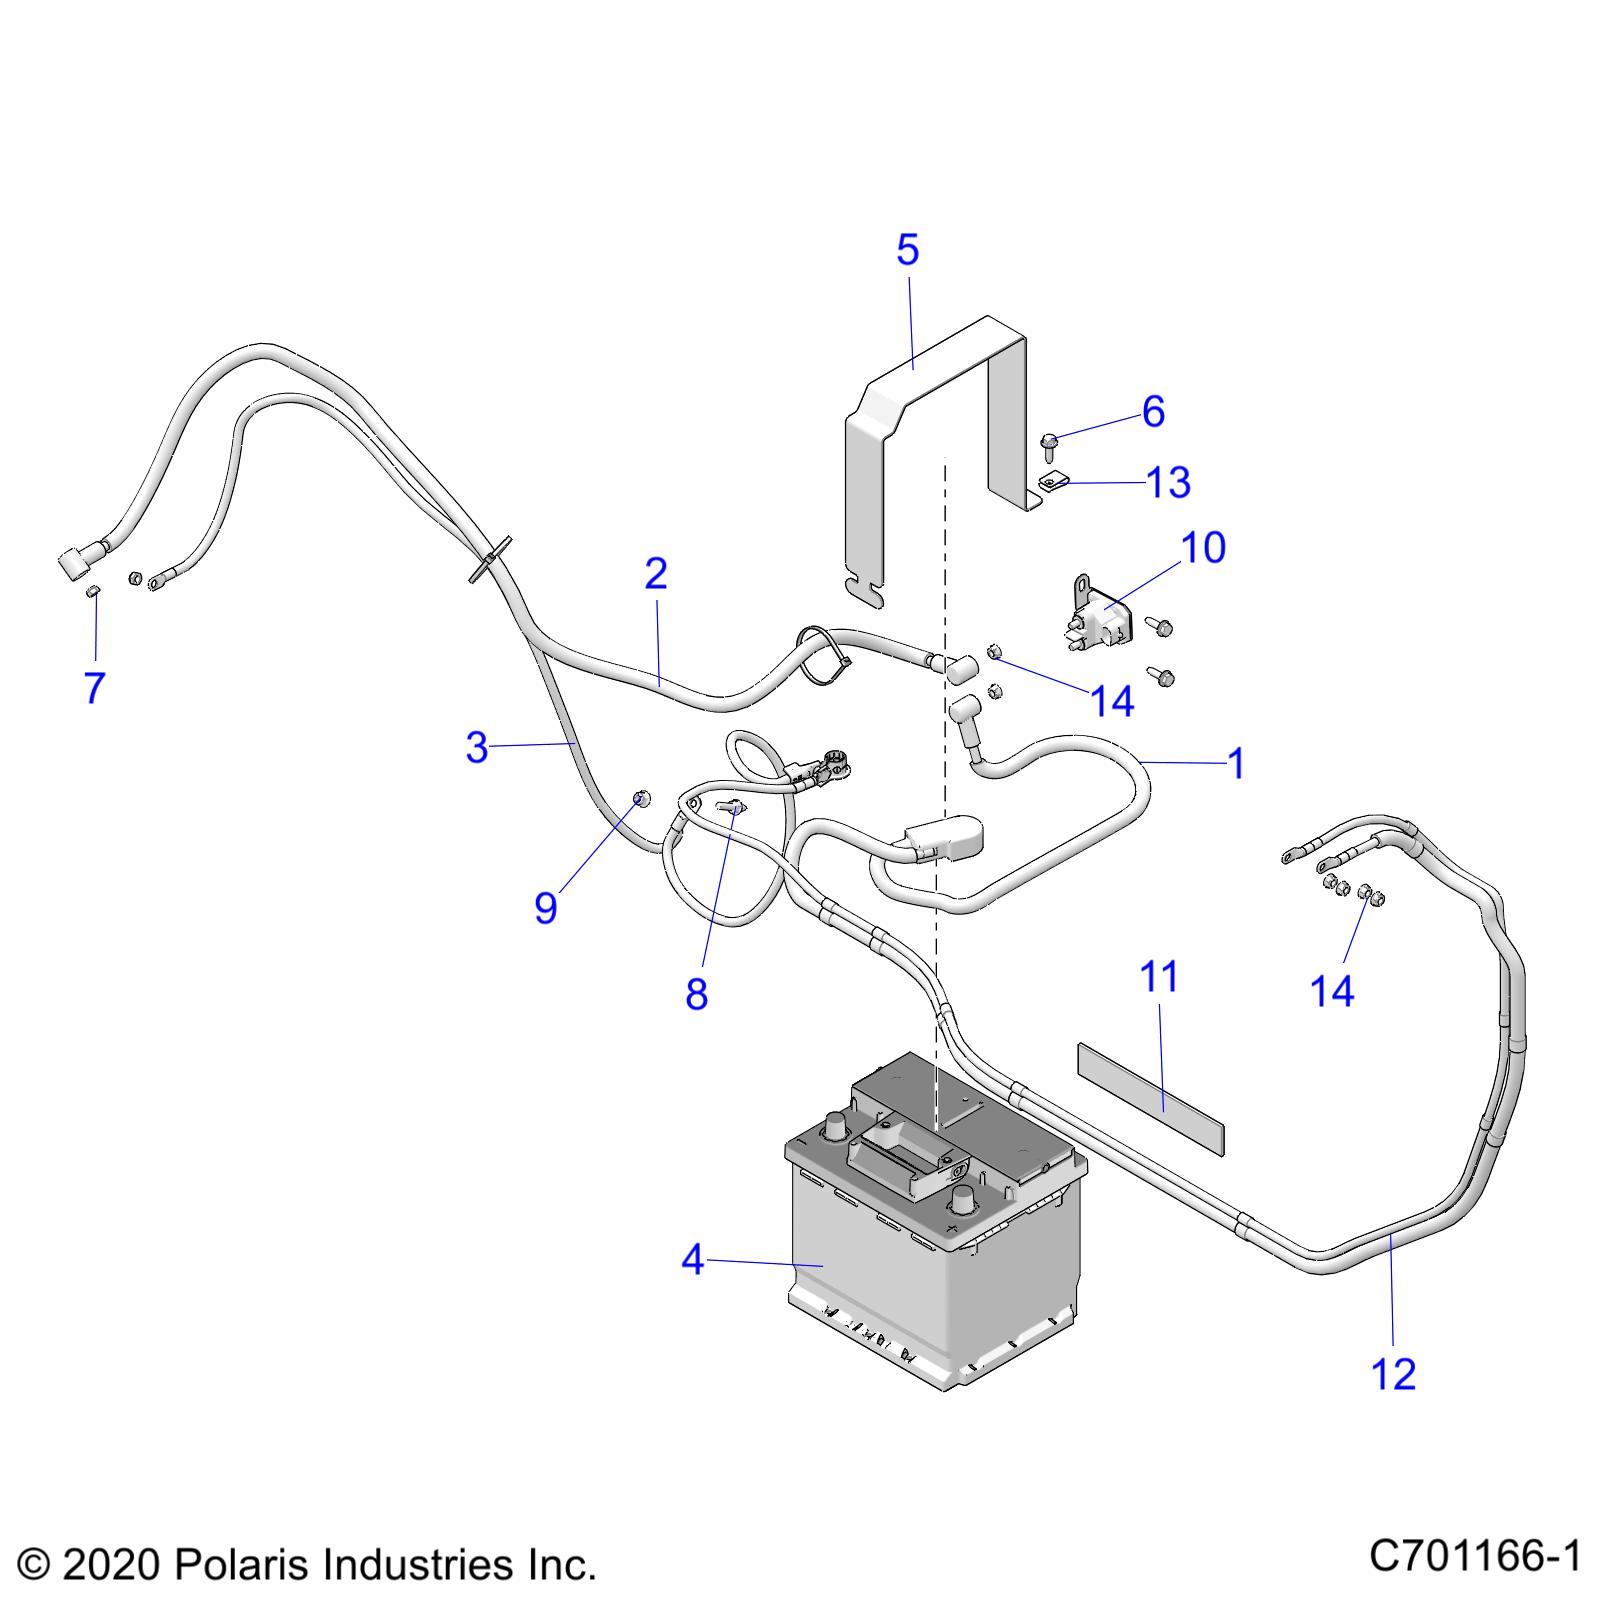 Part Number : 4015499 BATTERY TO SOLENOID CABLE